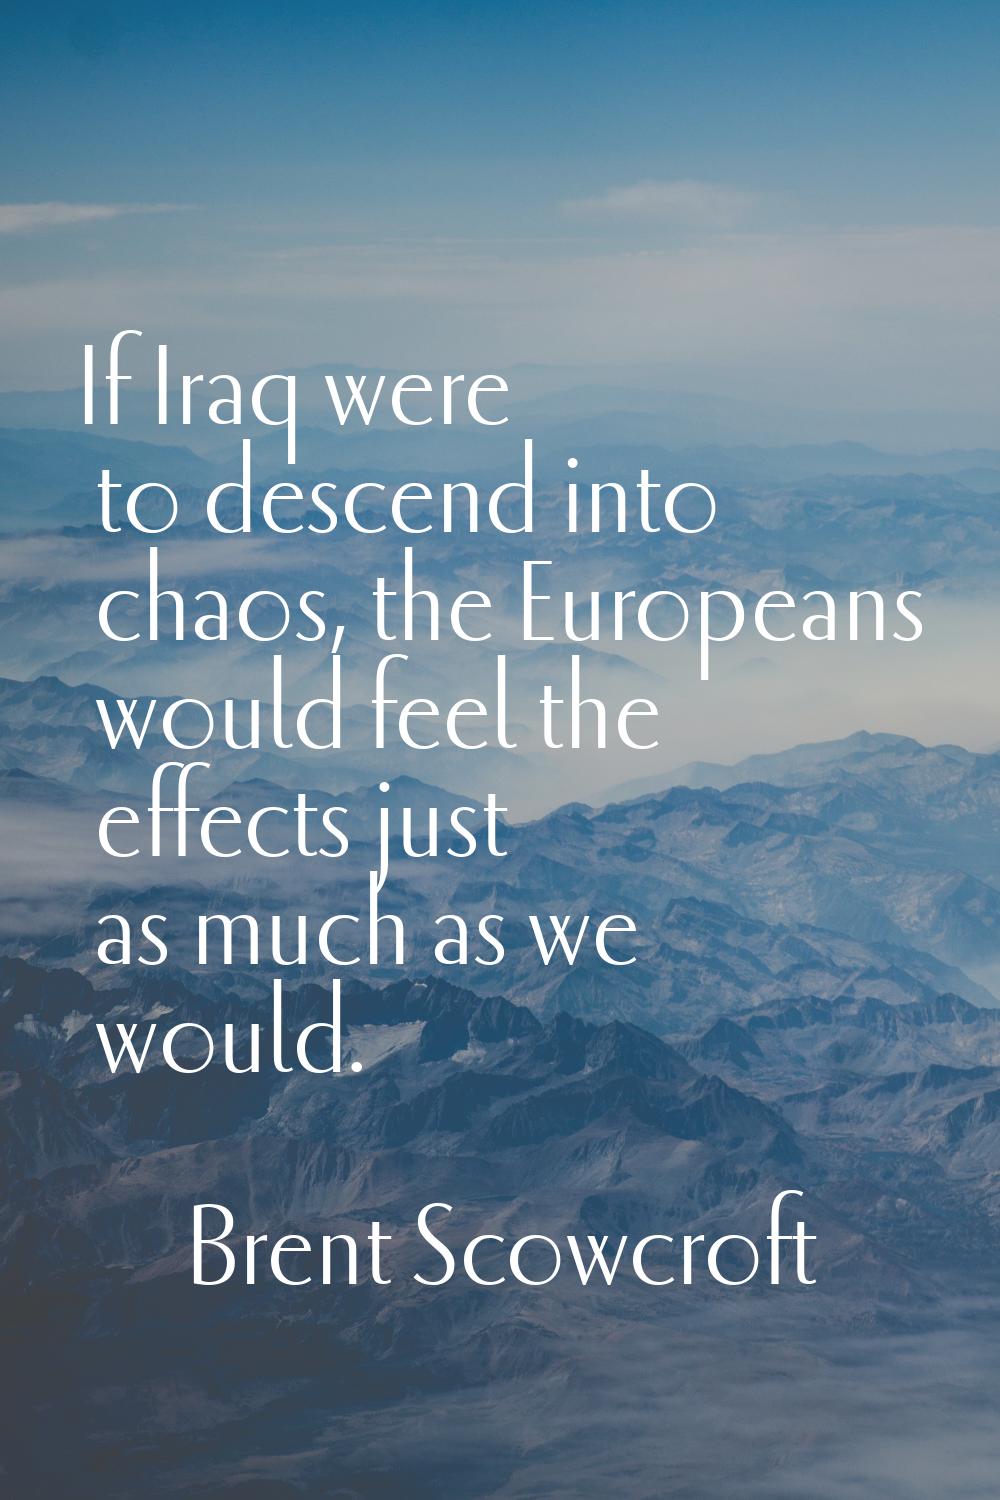 If Iraq were to descend into chaos, the Europeans would feel the effects just as much as we would.